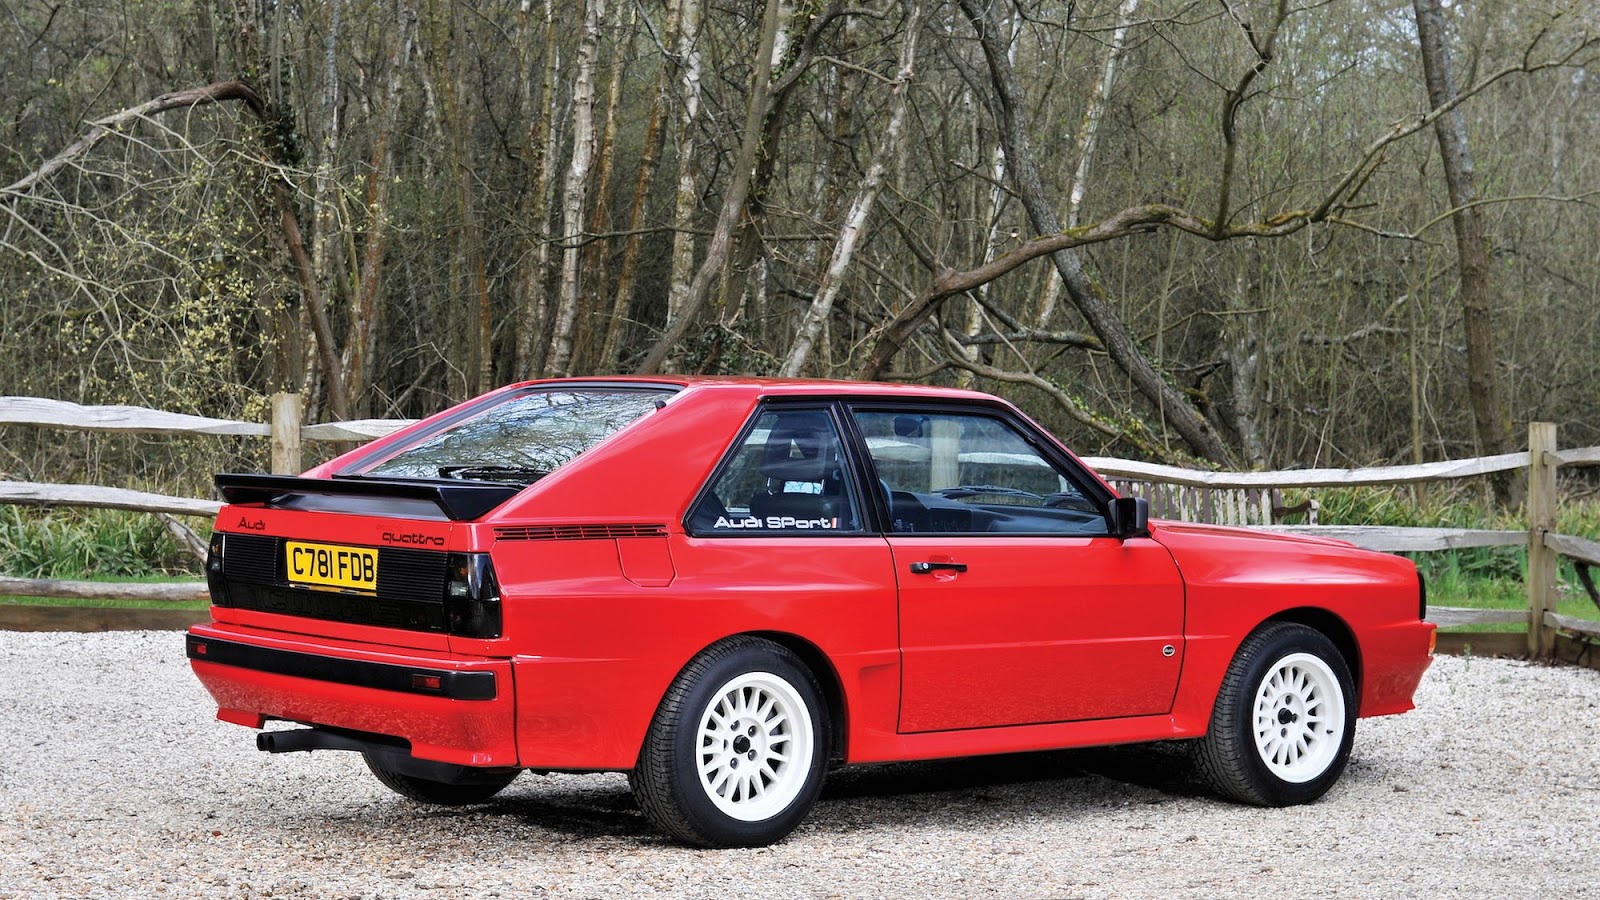 Stunning 1986 Audi Sport Quattro Sells For $536,000 At Auction! | Carscoops1600 x 900